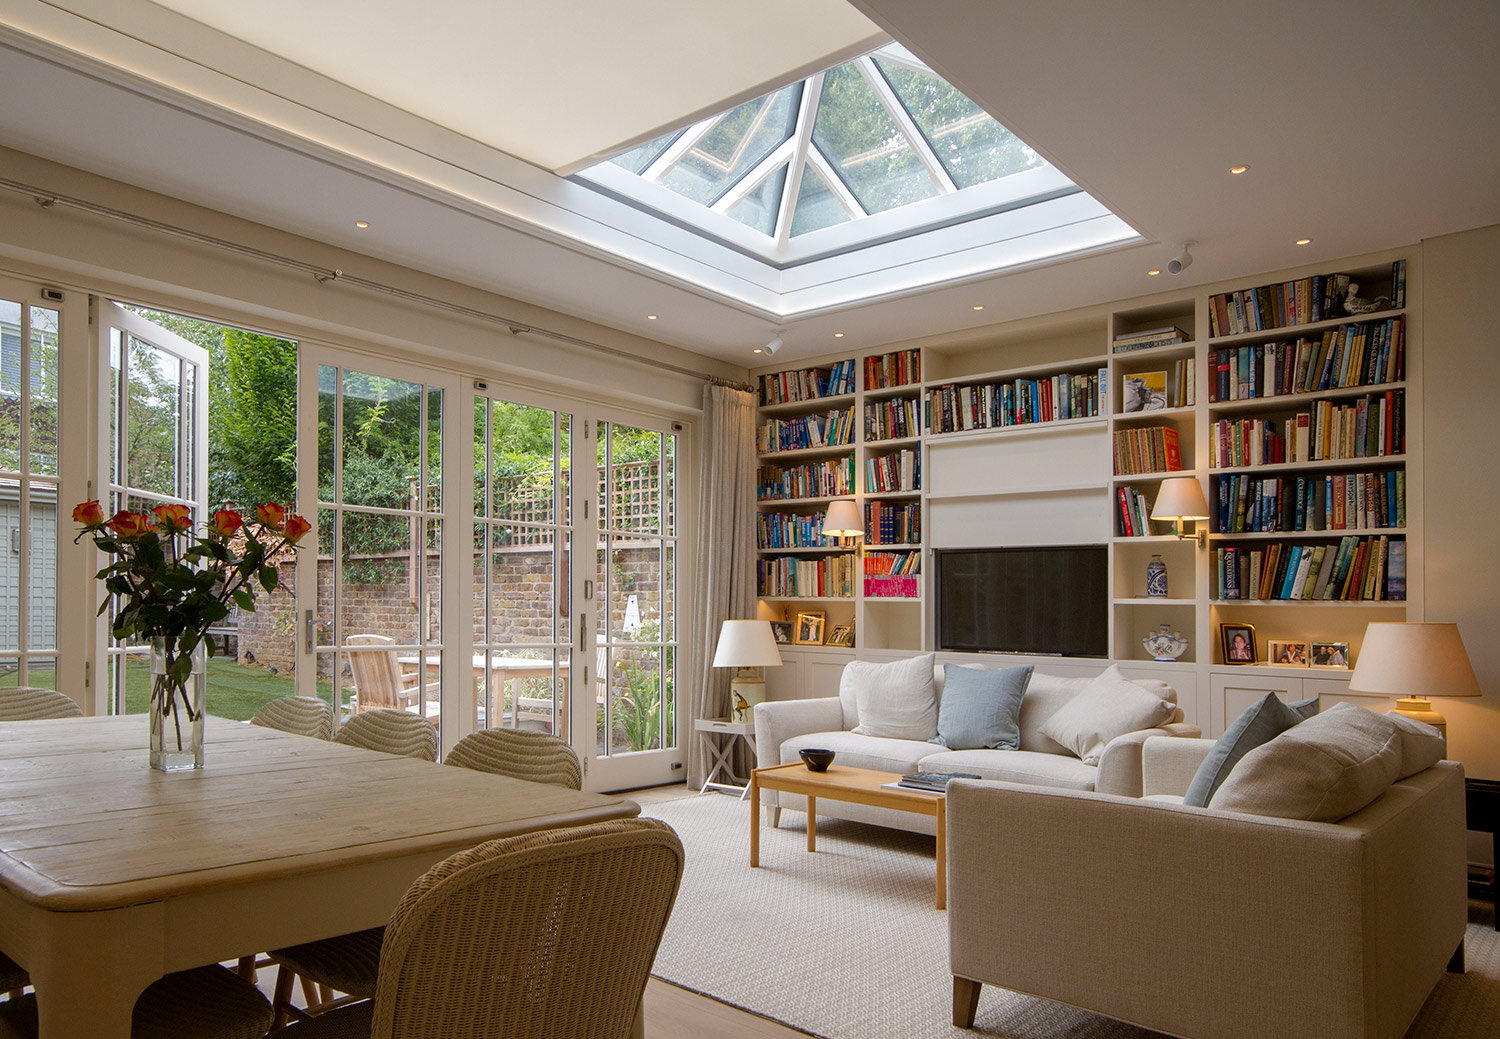 Electric Roof Blinds Surrey. With many homes adding roof lanterns the need for a motorised roof blind solution has led to manufacturers providing a number of solutions, including zip tensioned blinds.